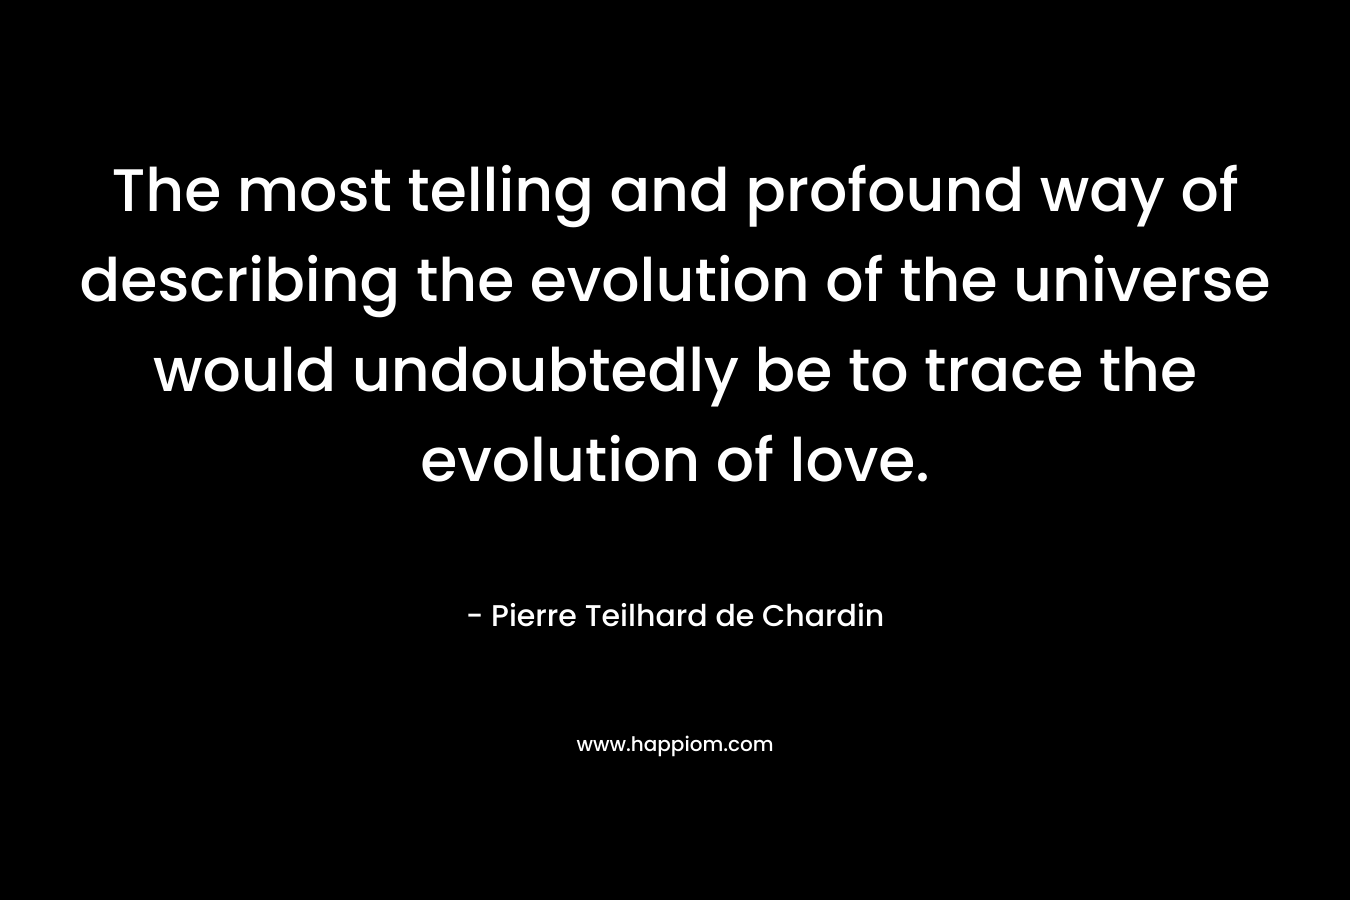 The most telling and profound way of describing the evolution of the universe would undoubtedly be to trace the evolution of love. – Pierre Teilhard de Chardin